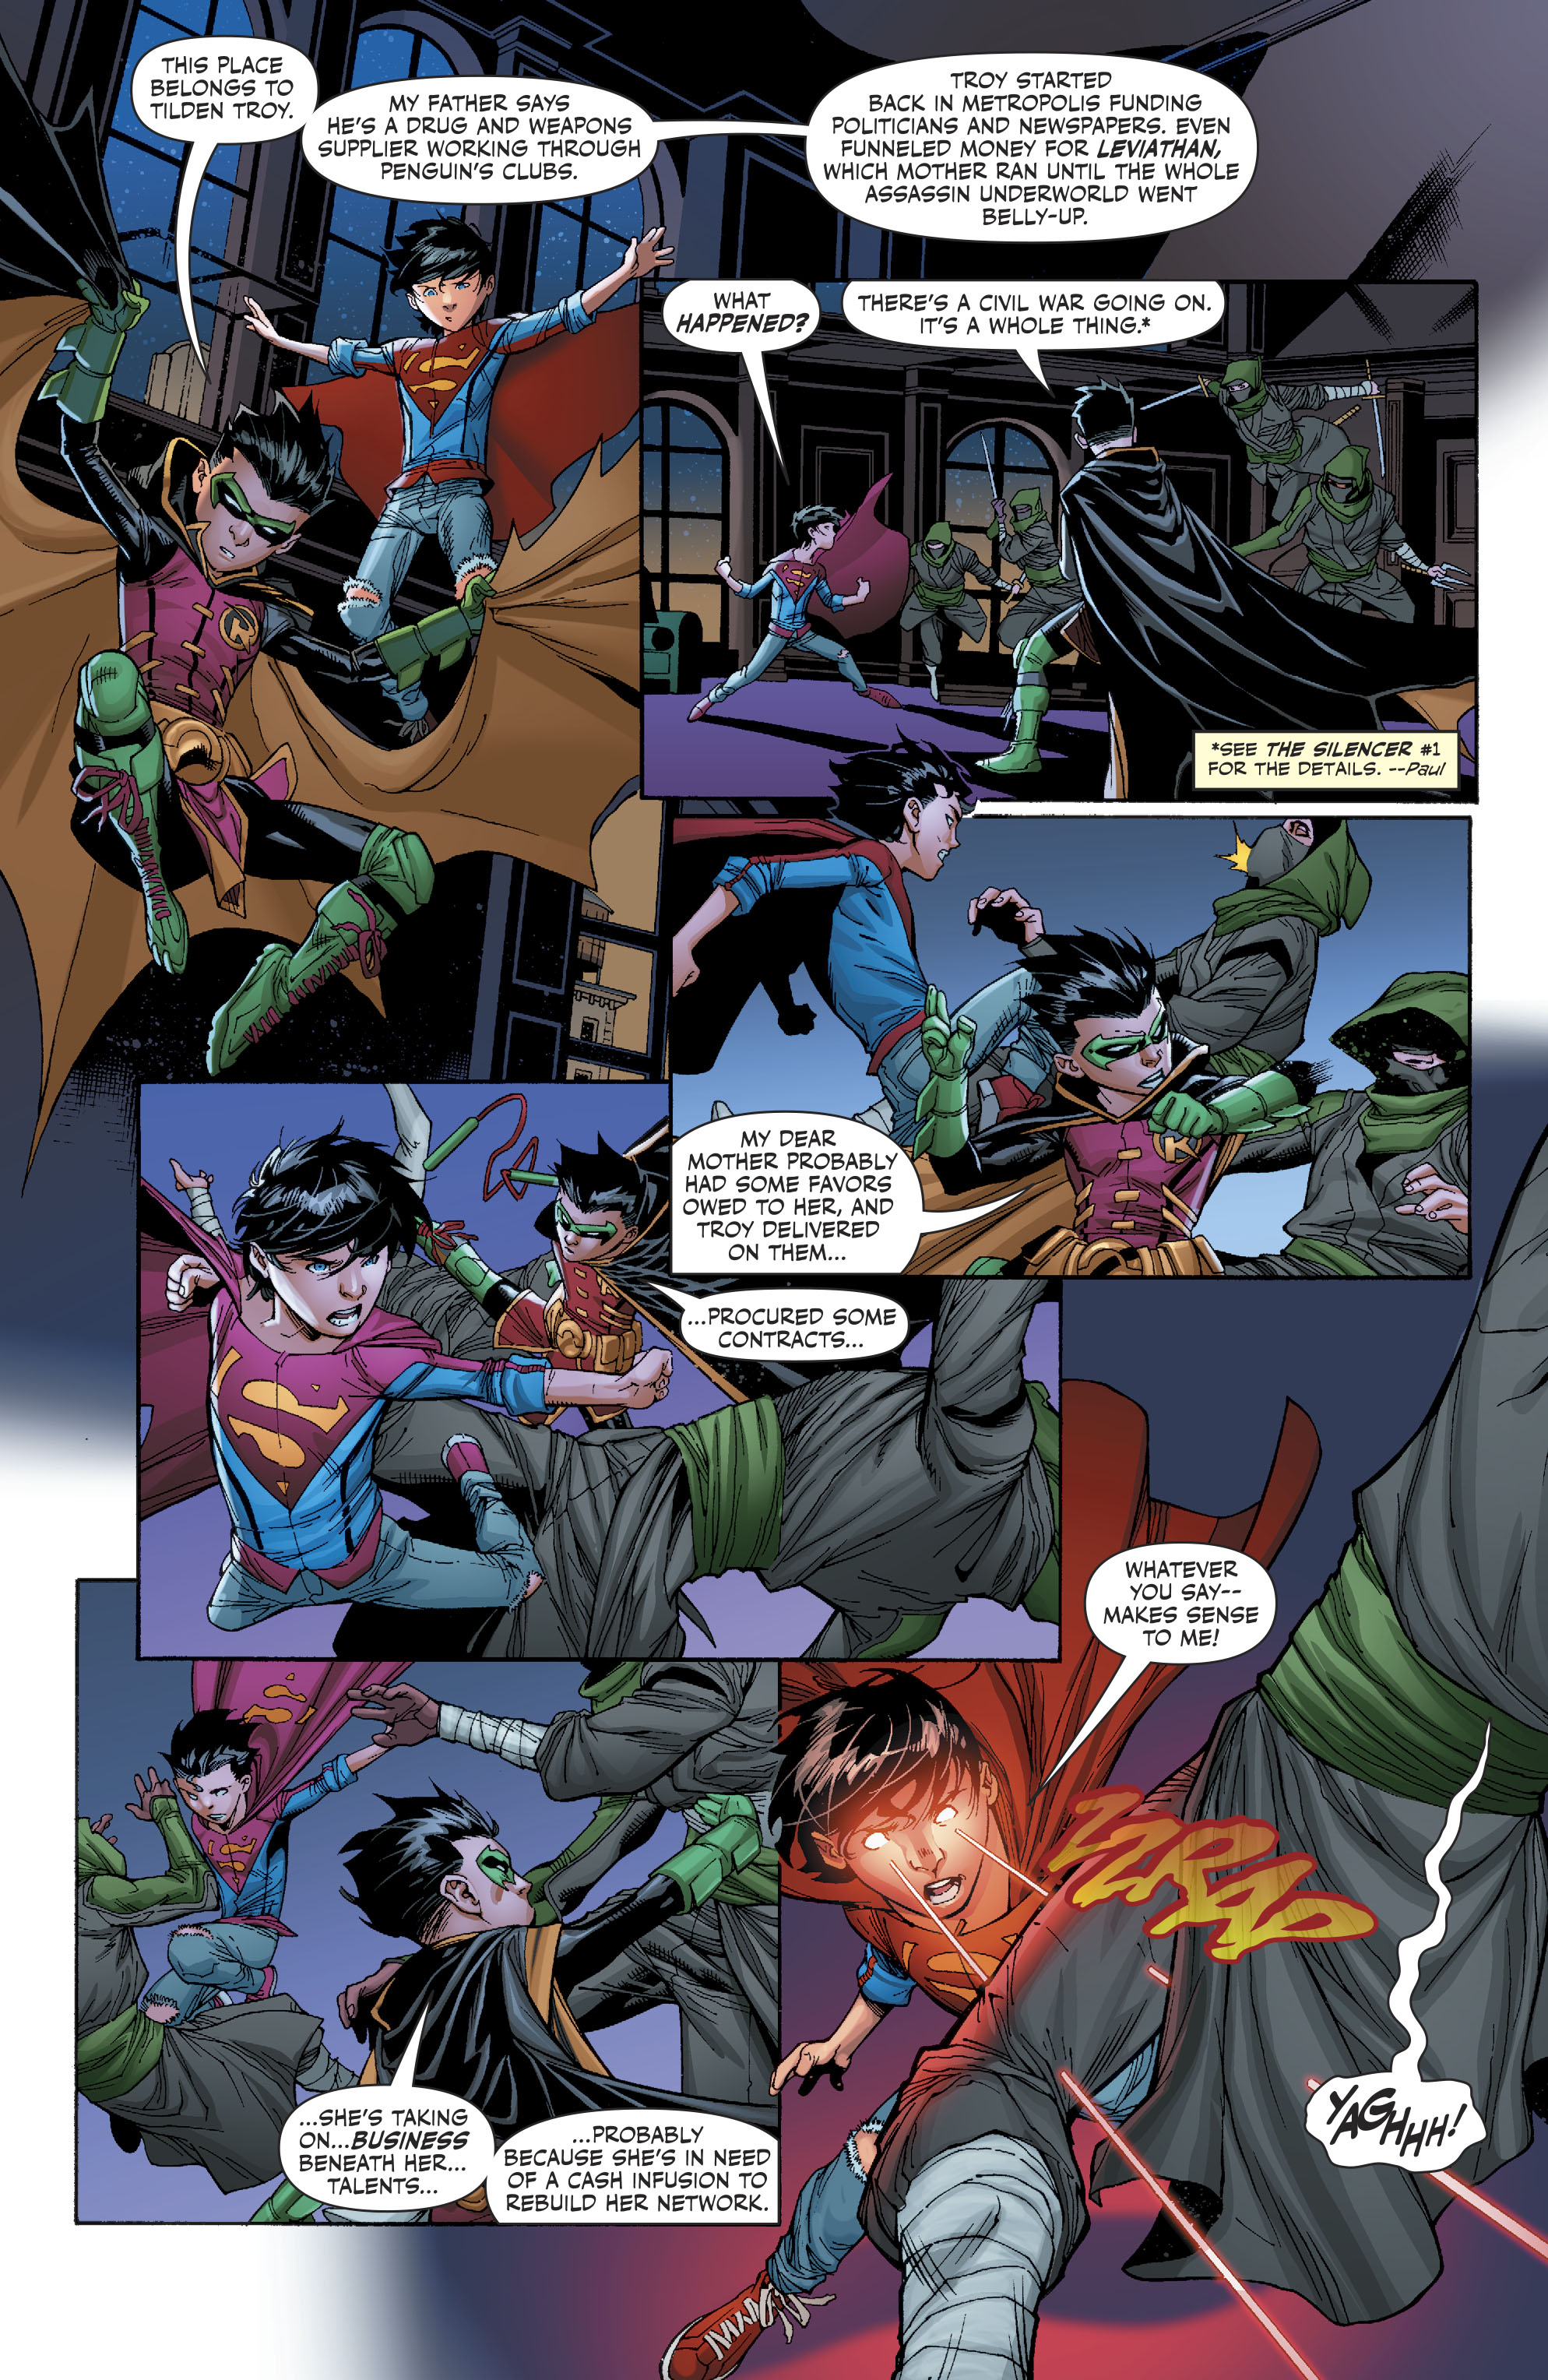 Superboy Learns Of Robin's History (Rebirth)